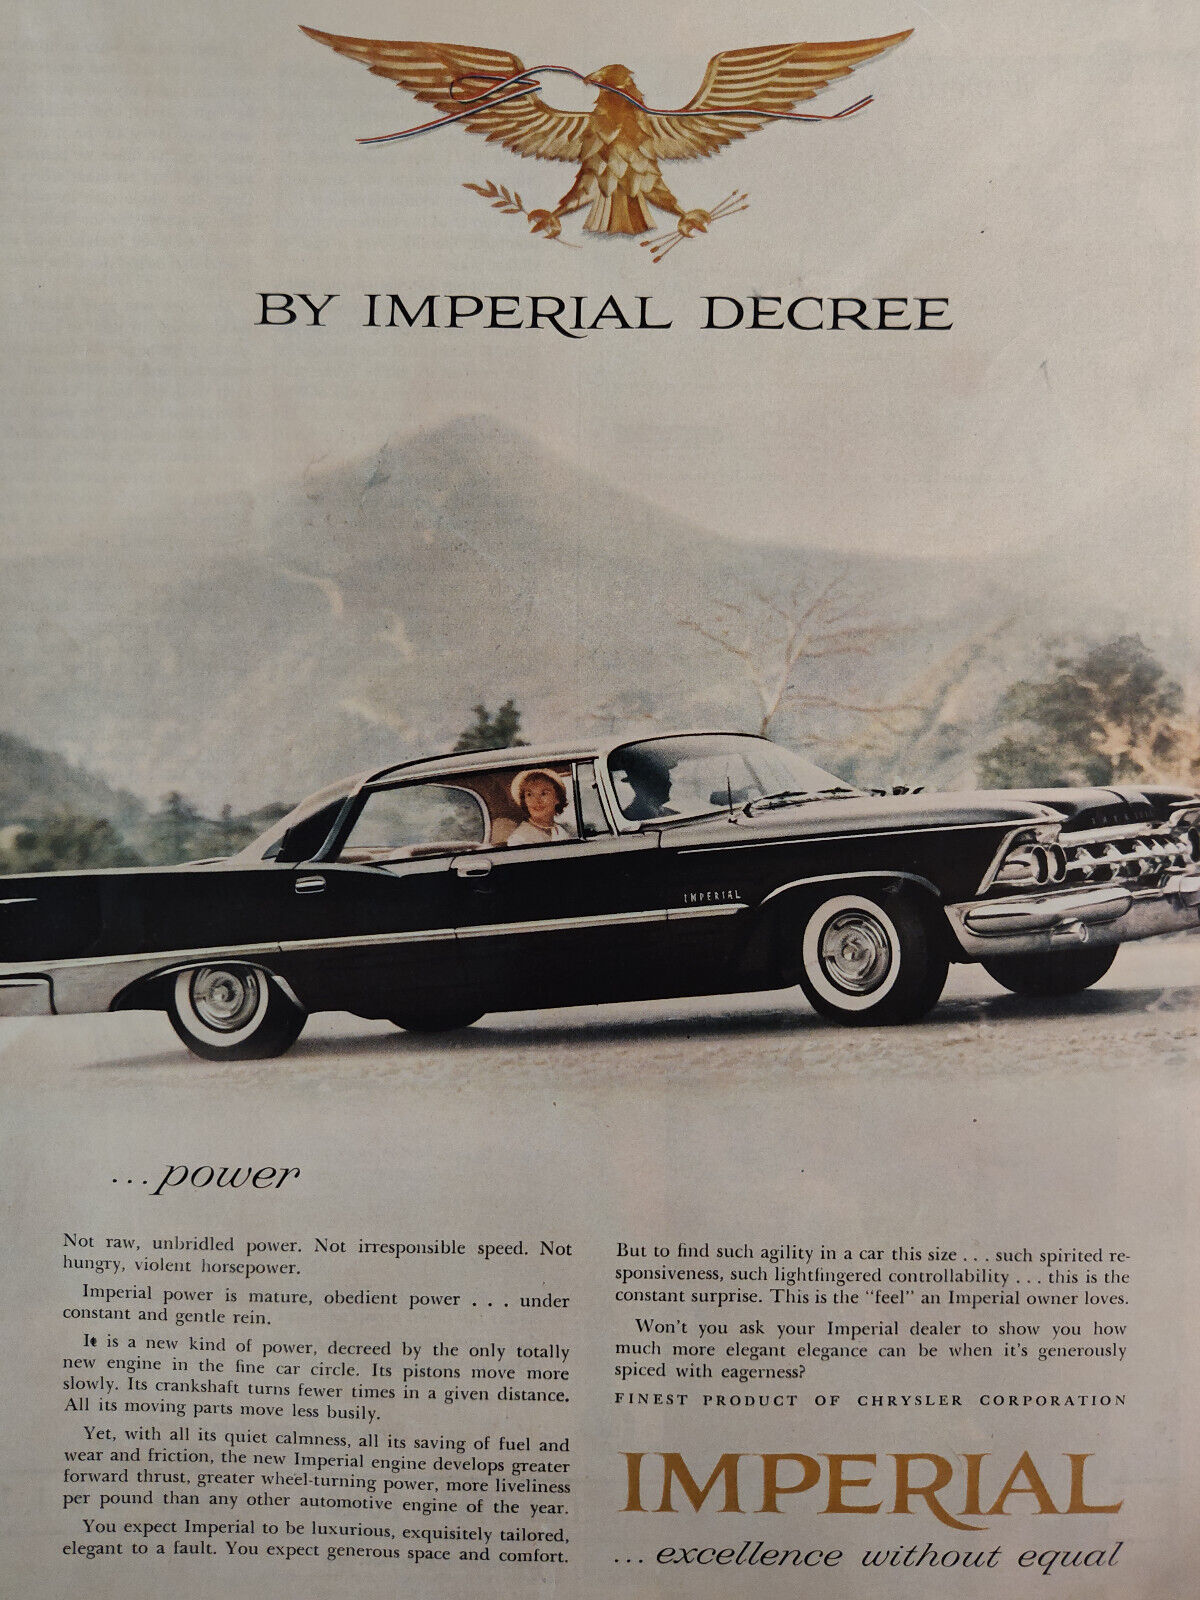 1959 Holiday Original Art Ad Advertisement Chrysler by IMPERIAL decree